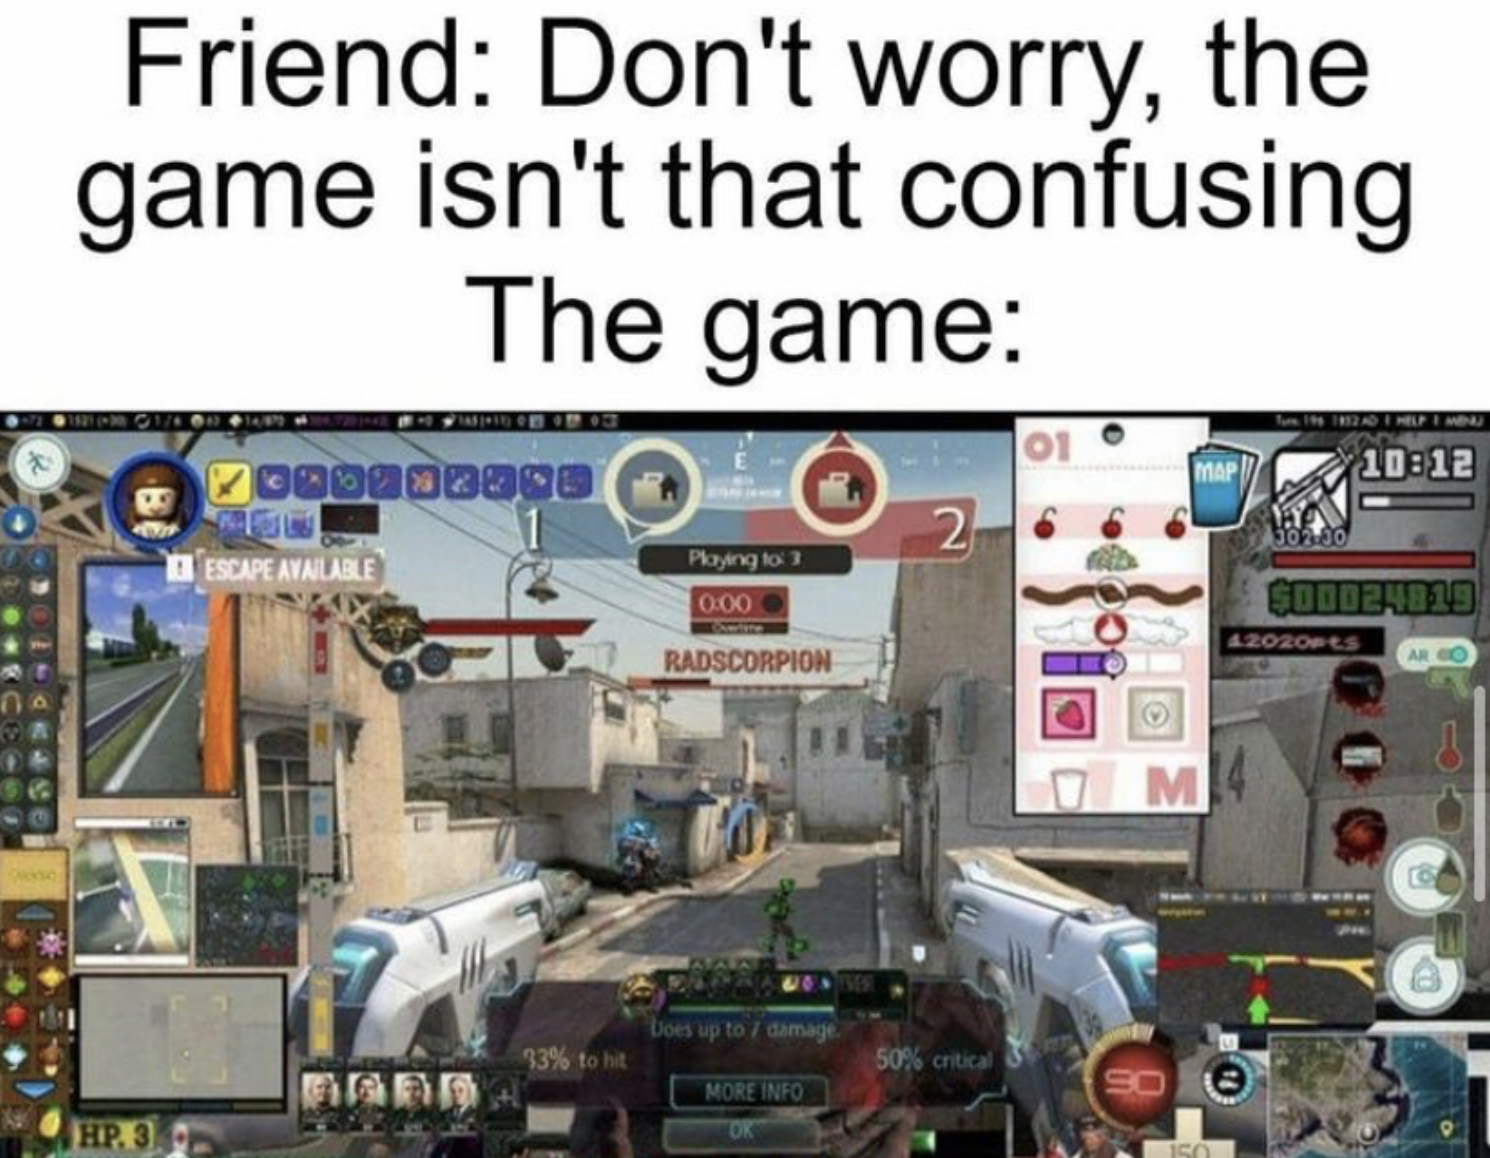 funny gaming memes - game isn t that confusing meme - Friend Don't worry, the game isn't that confusing The game 101 Badge 2 Descape Available Pong 000 Goudendid 42020 Radscorpion Um cama 33% to he 50% antica More Info So @ HP3